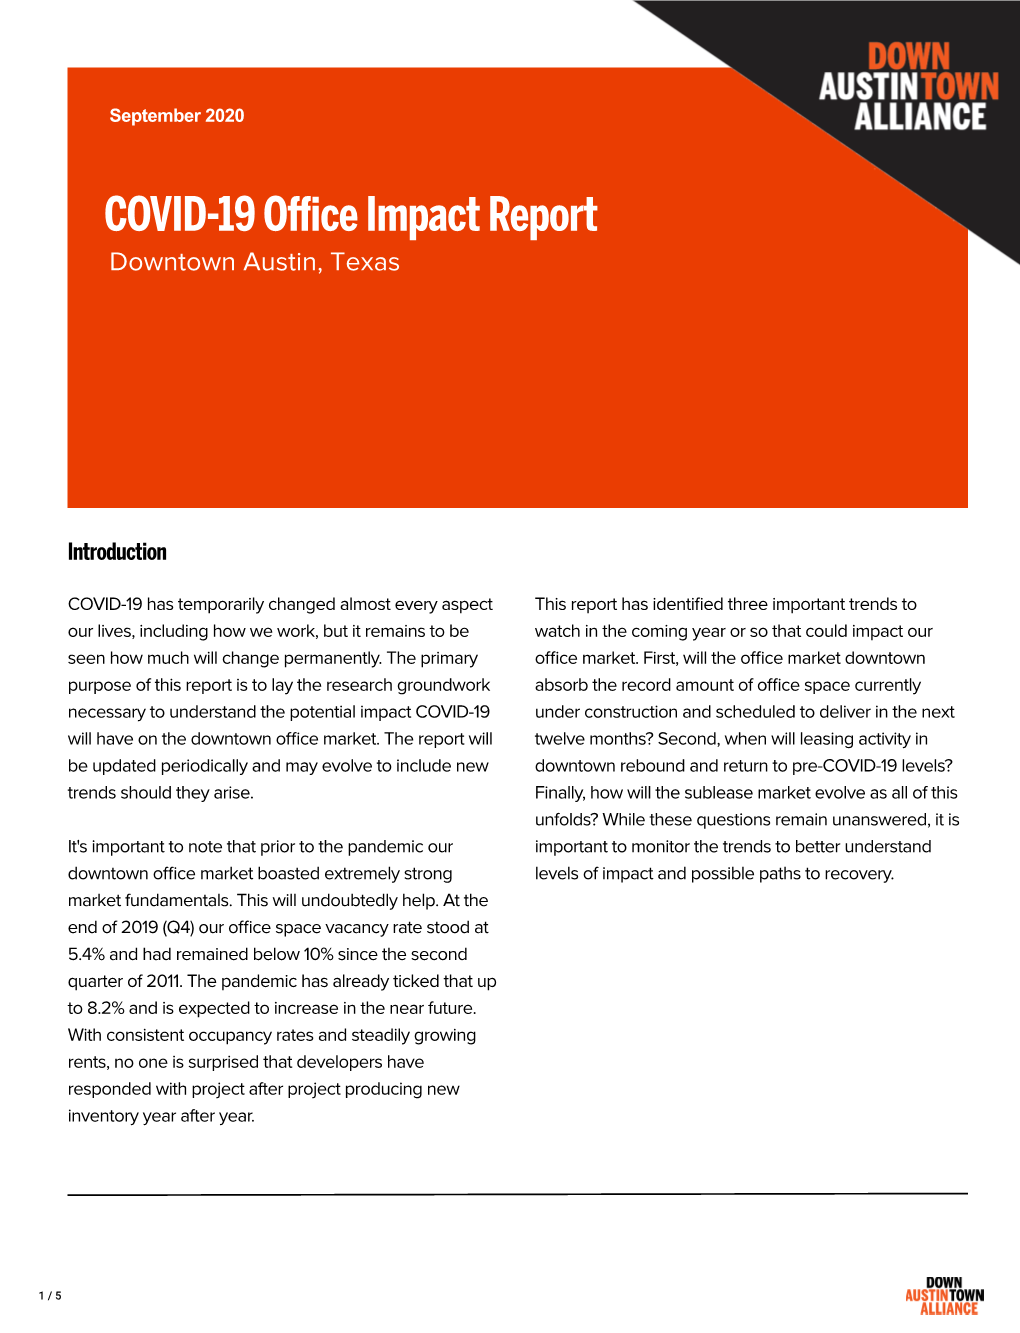 COVID-19 Office Impact Report: Downtown Austin, Texas